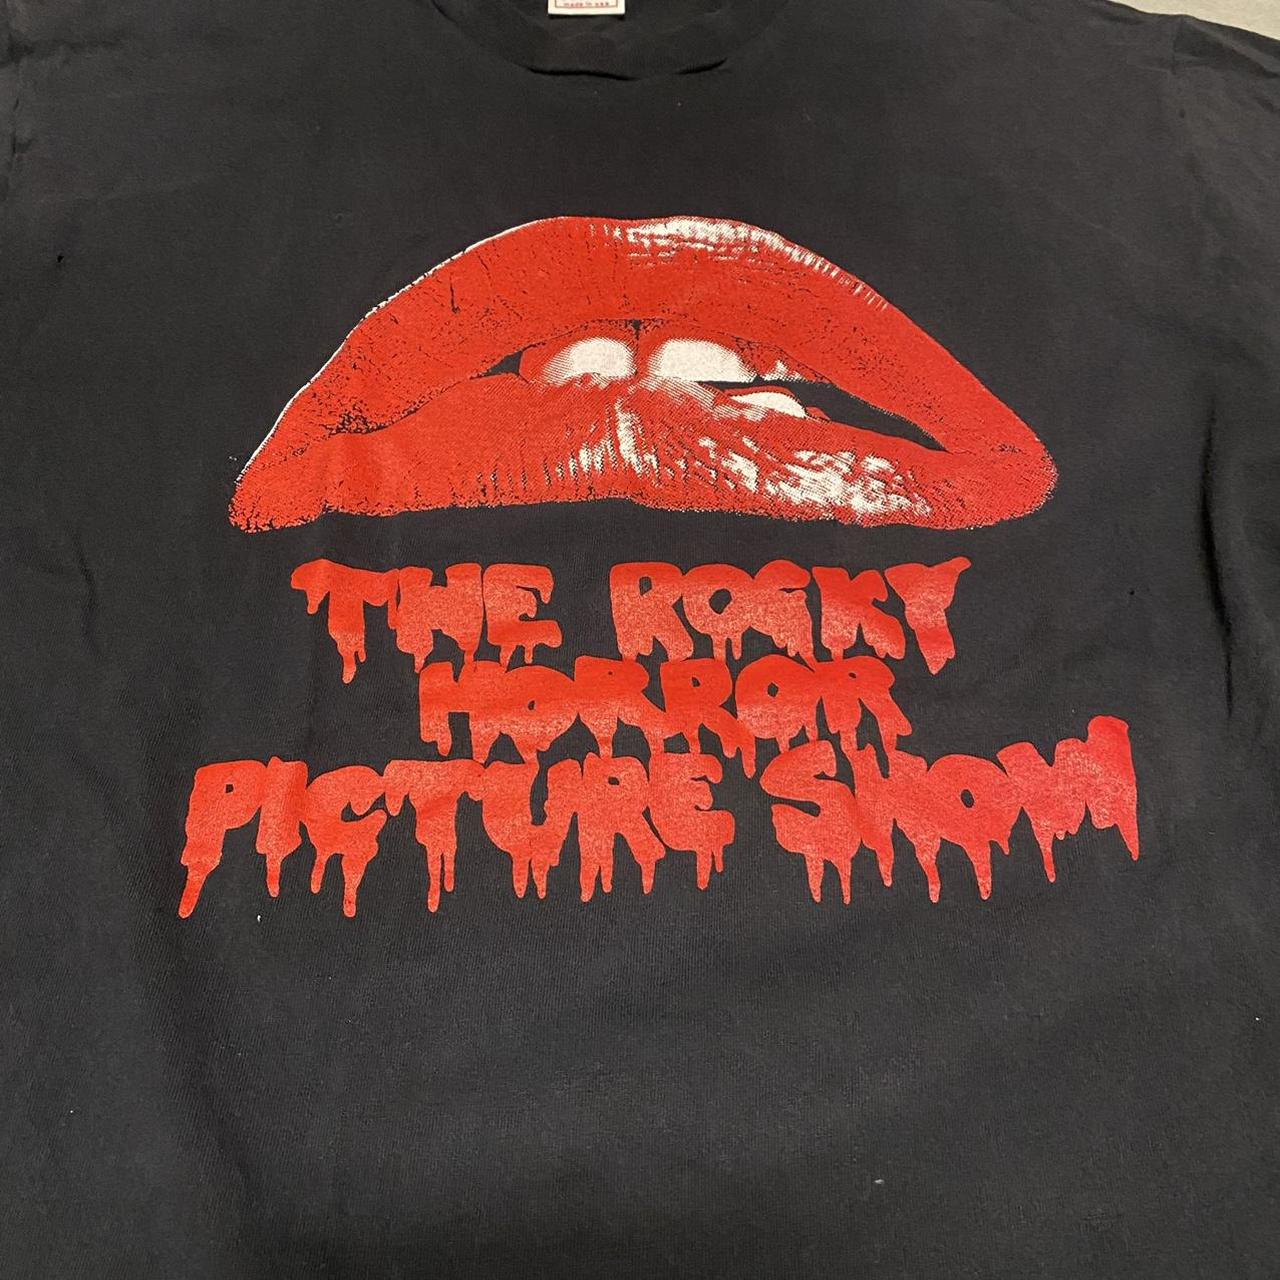 Vintage 90s The Rocky Horror Picture Show tee 